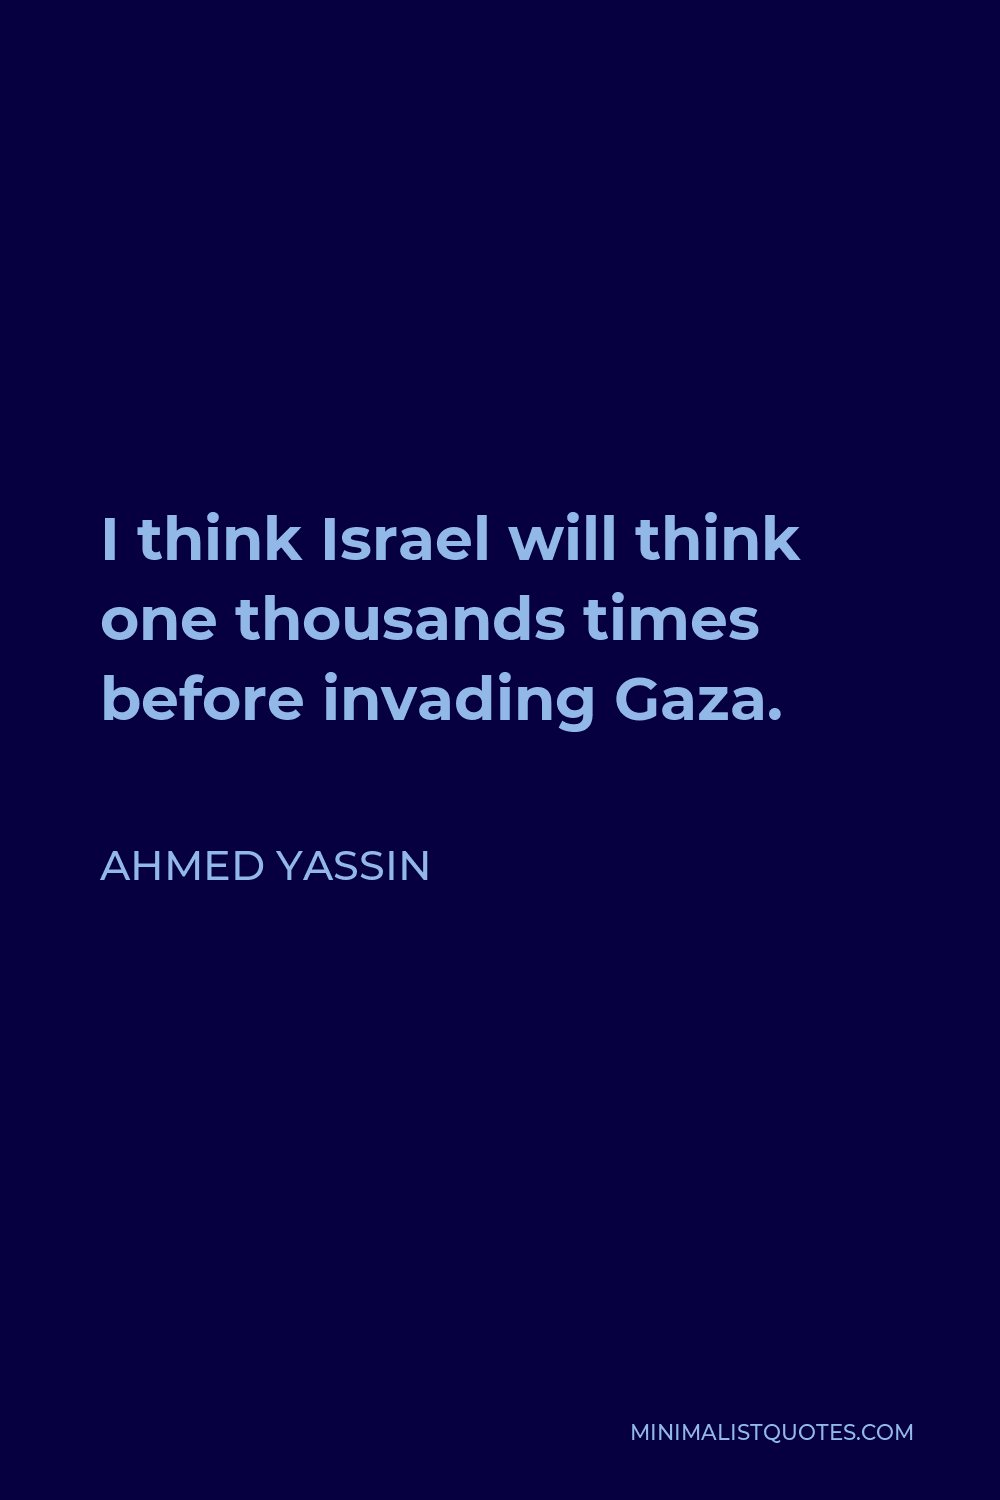 Ahmed Yassin Quote - I think Israel will think one thousands times before invading Gaza.